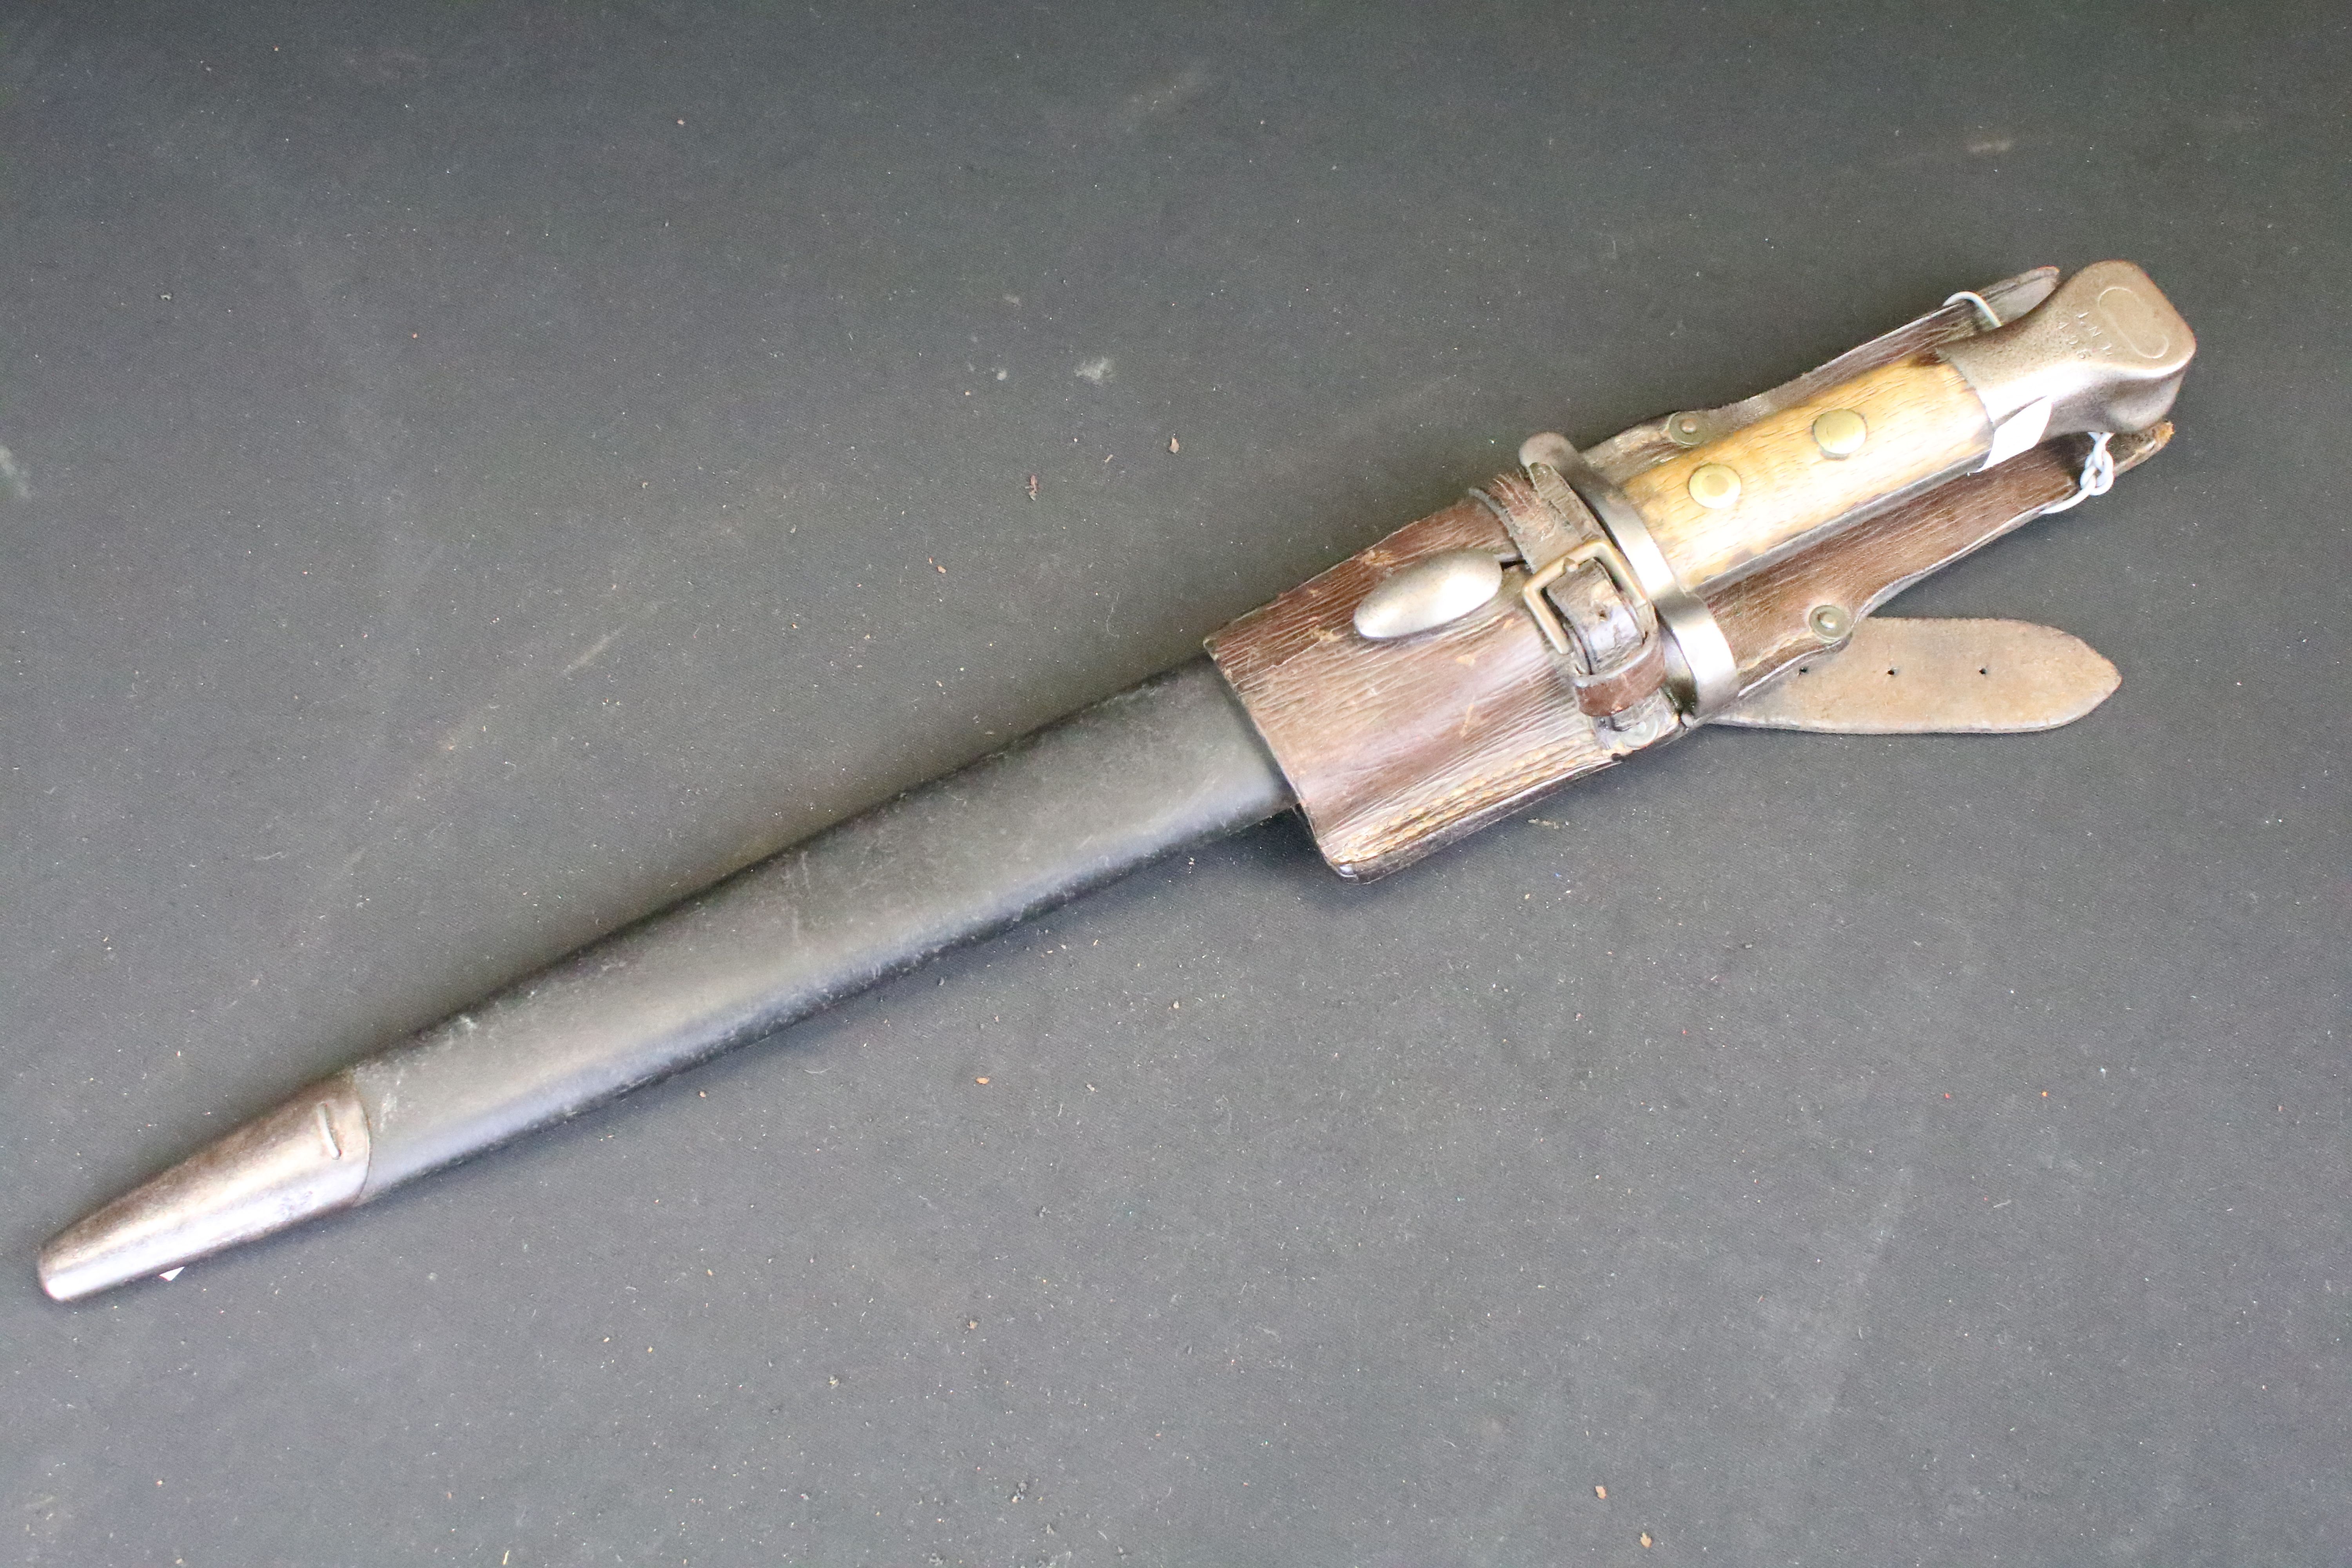 A Victorian Lee Metford bayonet, nice clear markings to the blade, complete with scabbard and frog. - Image 5 of 5